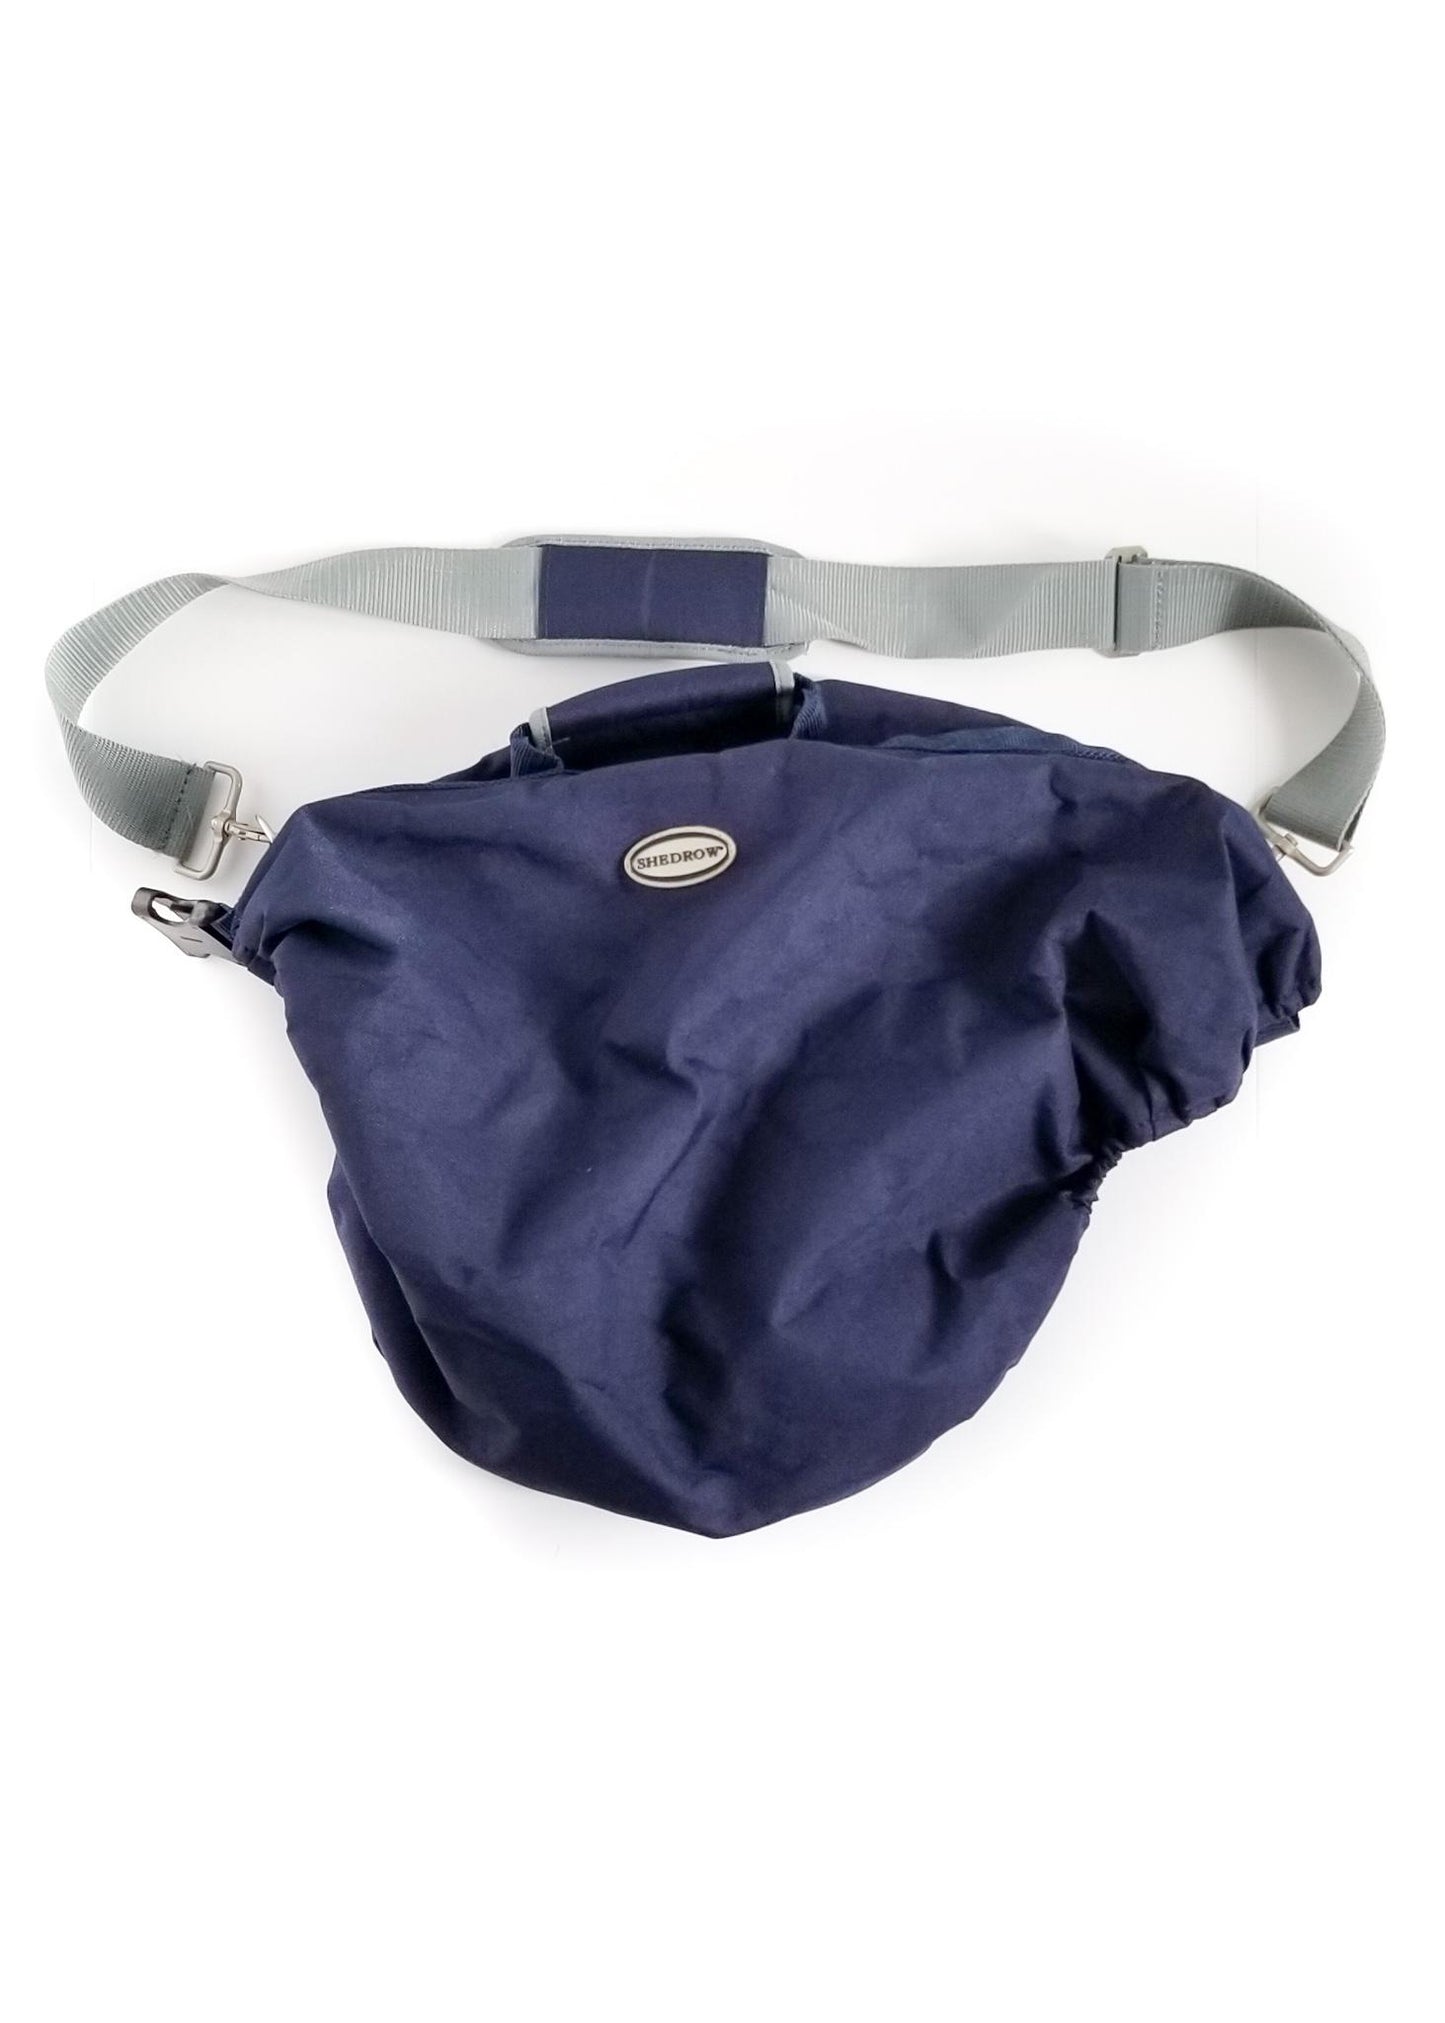 Shedrow English Saddle Carrying Cover - Navy Blue - One Size